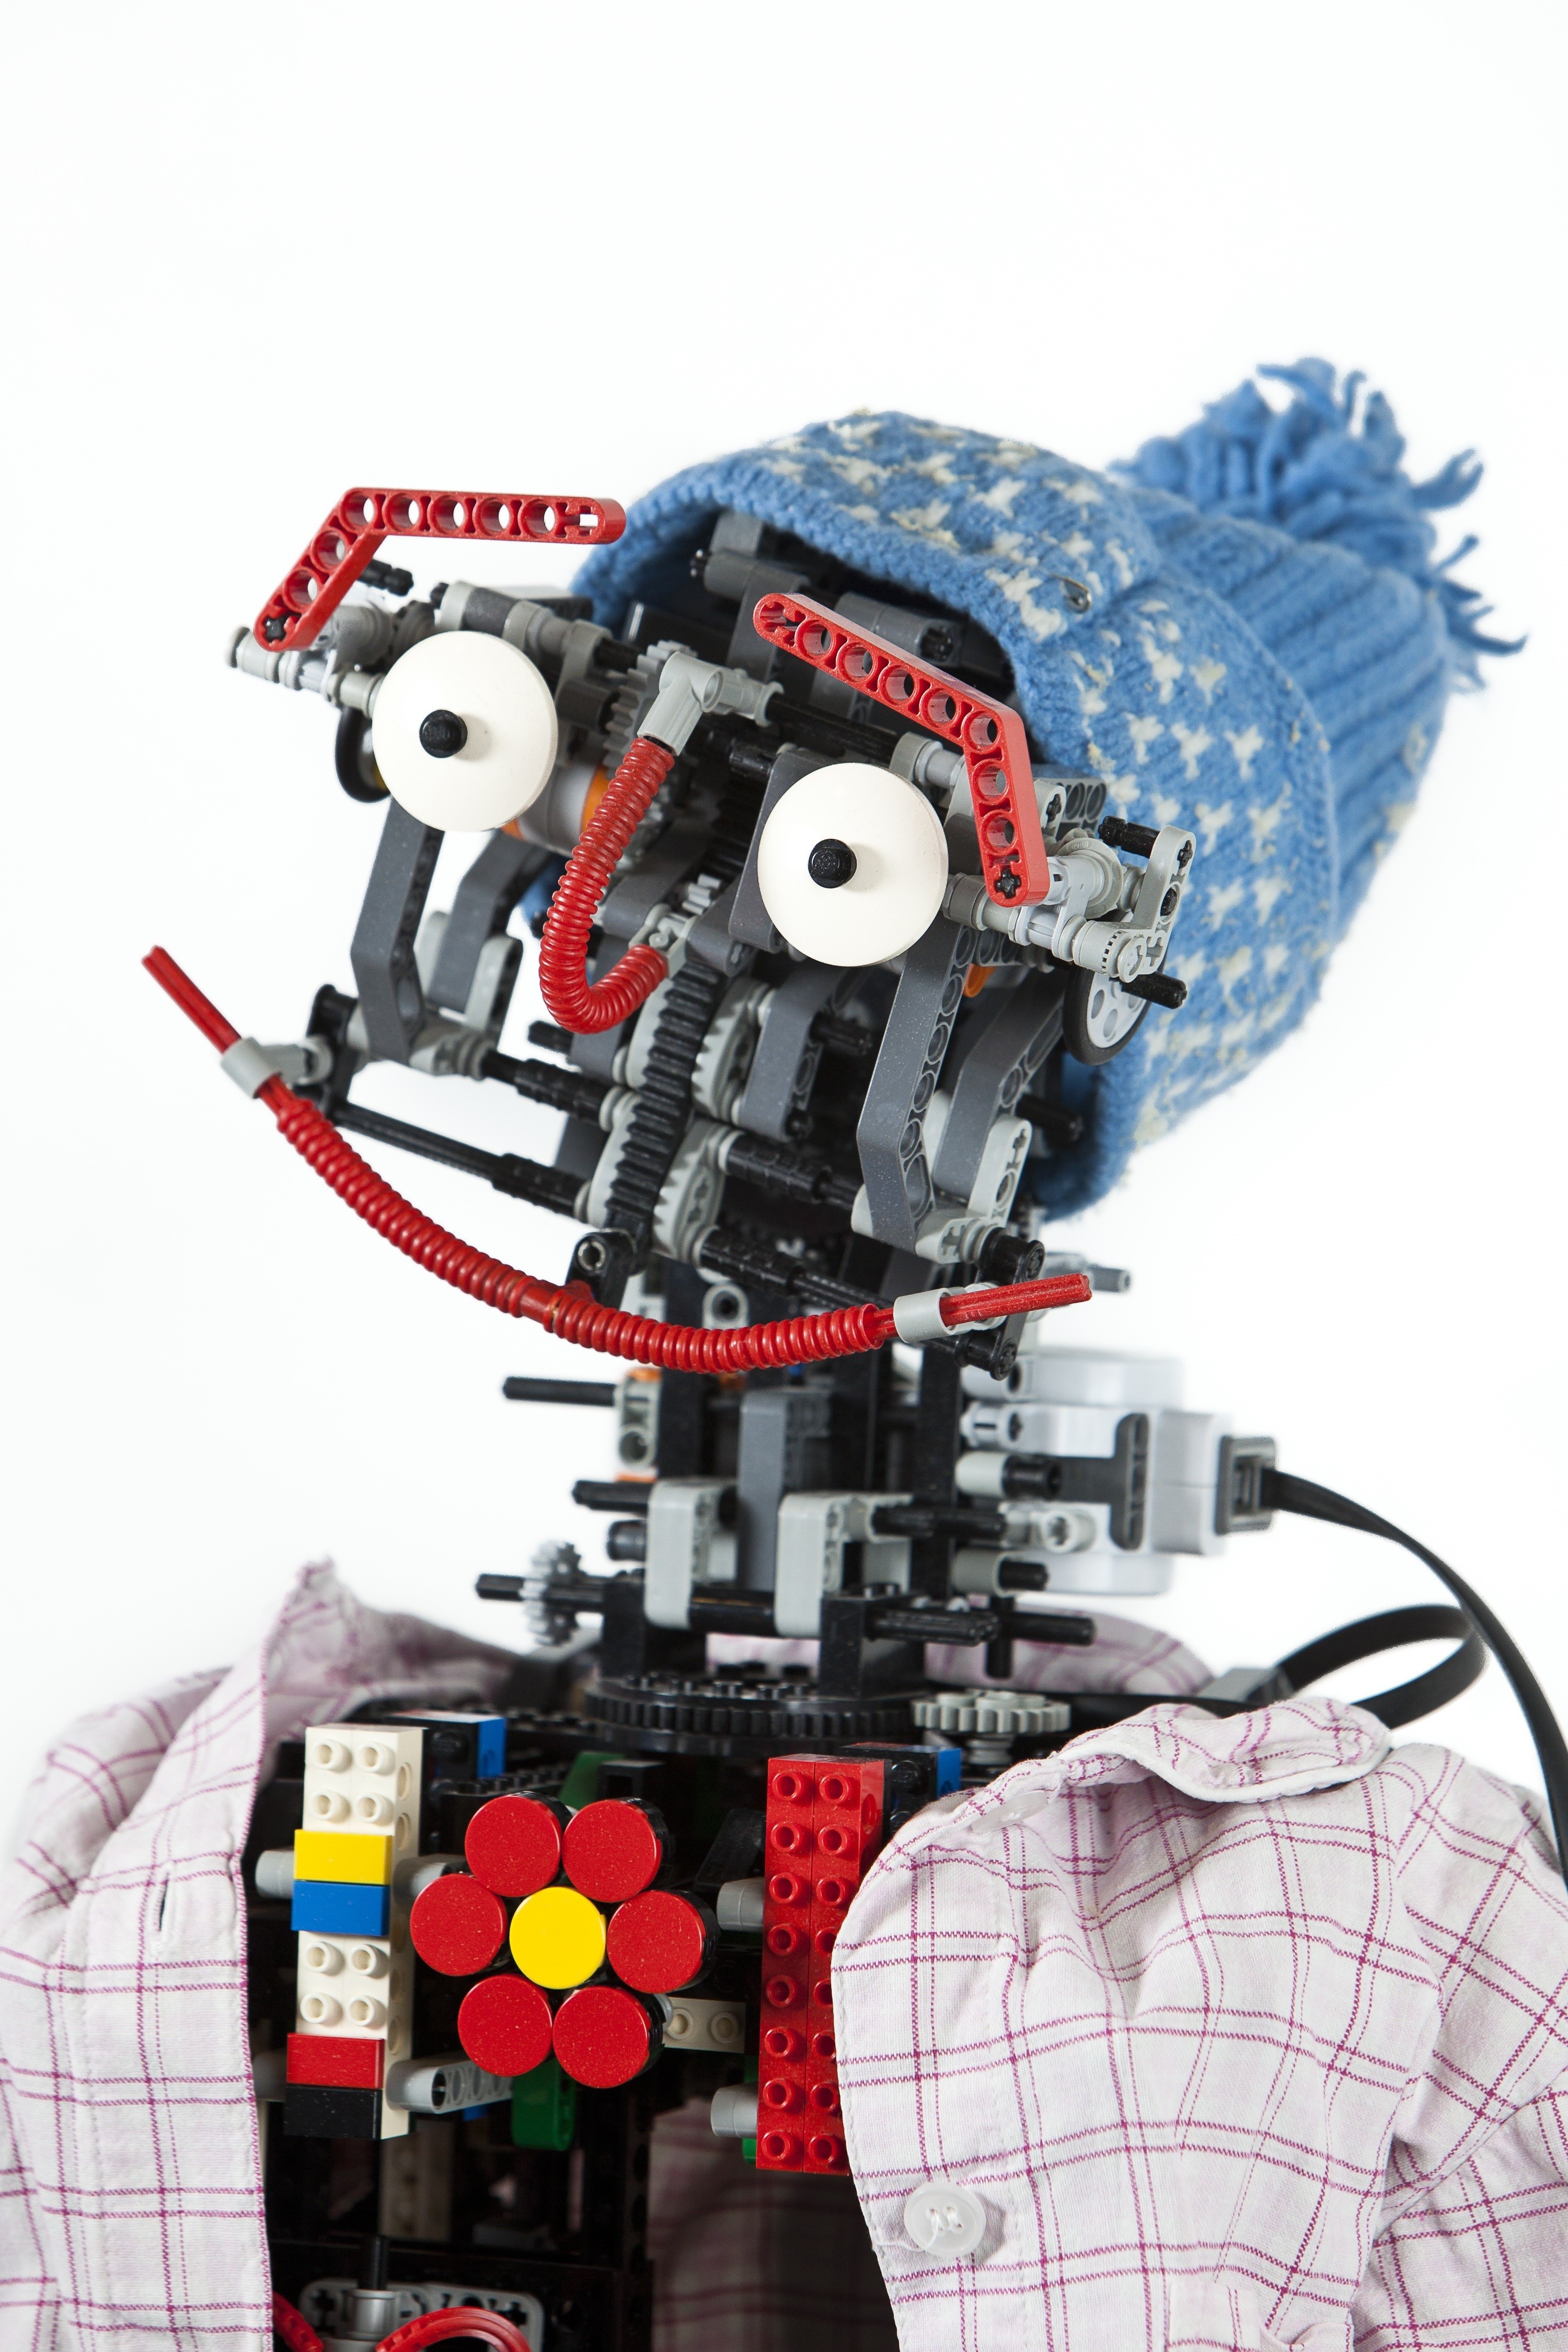 LEGO, Robot, Technology, Shirt, Face, Eyes, Flowers, White Background, Toys, Bricks, Gears, Pipes Wallpaper